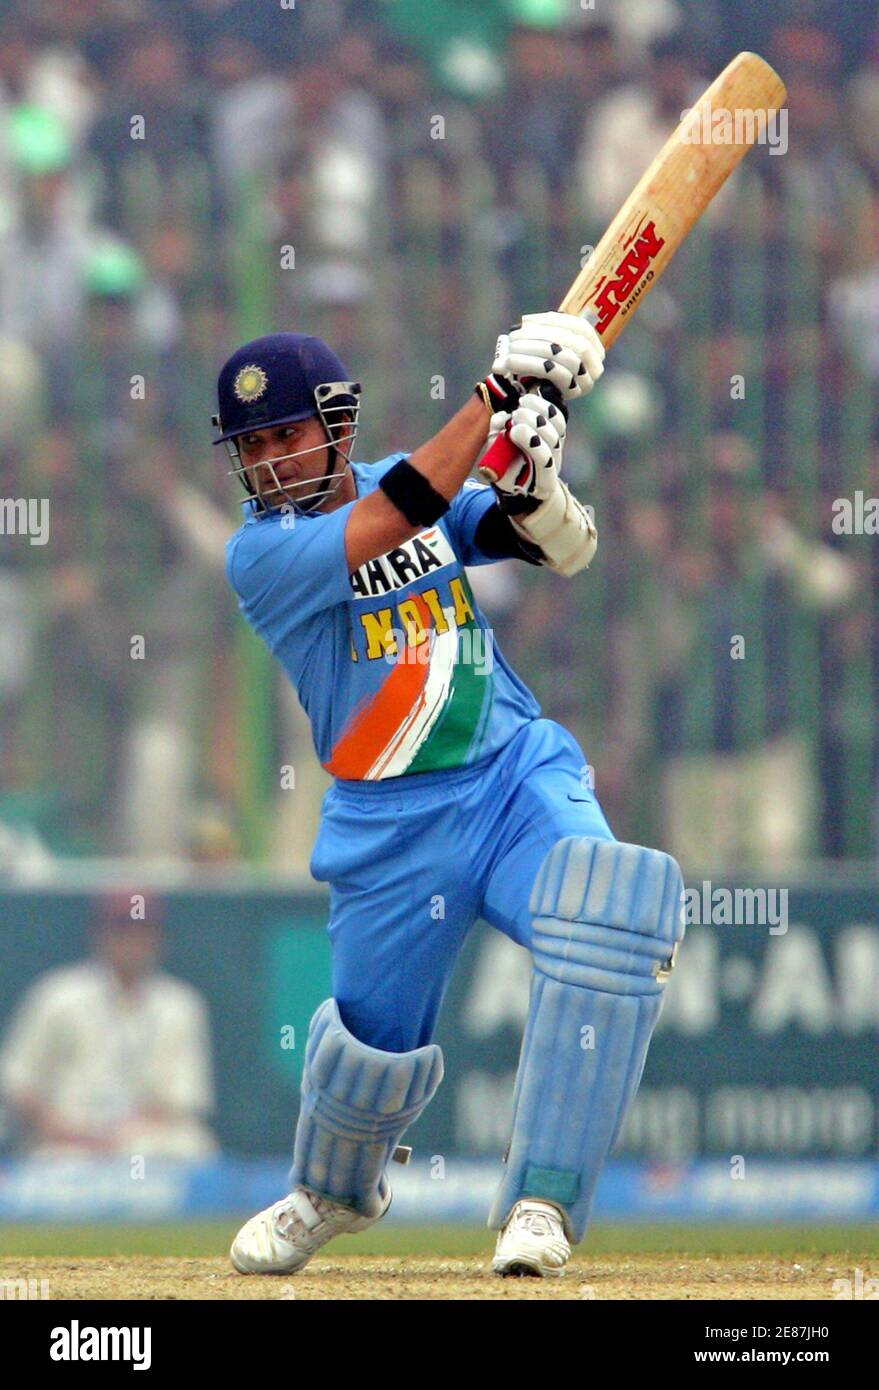 India's Sachin Tendulkar hits a shot in the first one-day international  cricket match between India and Pakistan in Peshawar February 6, 2006.  Tendulkar's 39th one-day international hundred led India to a huge